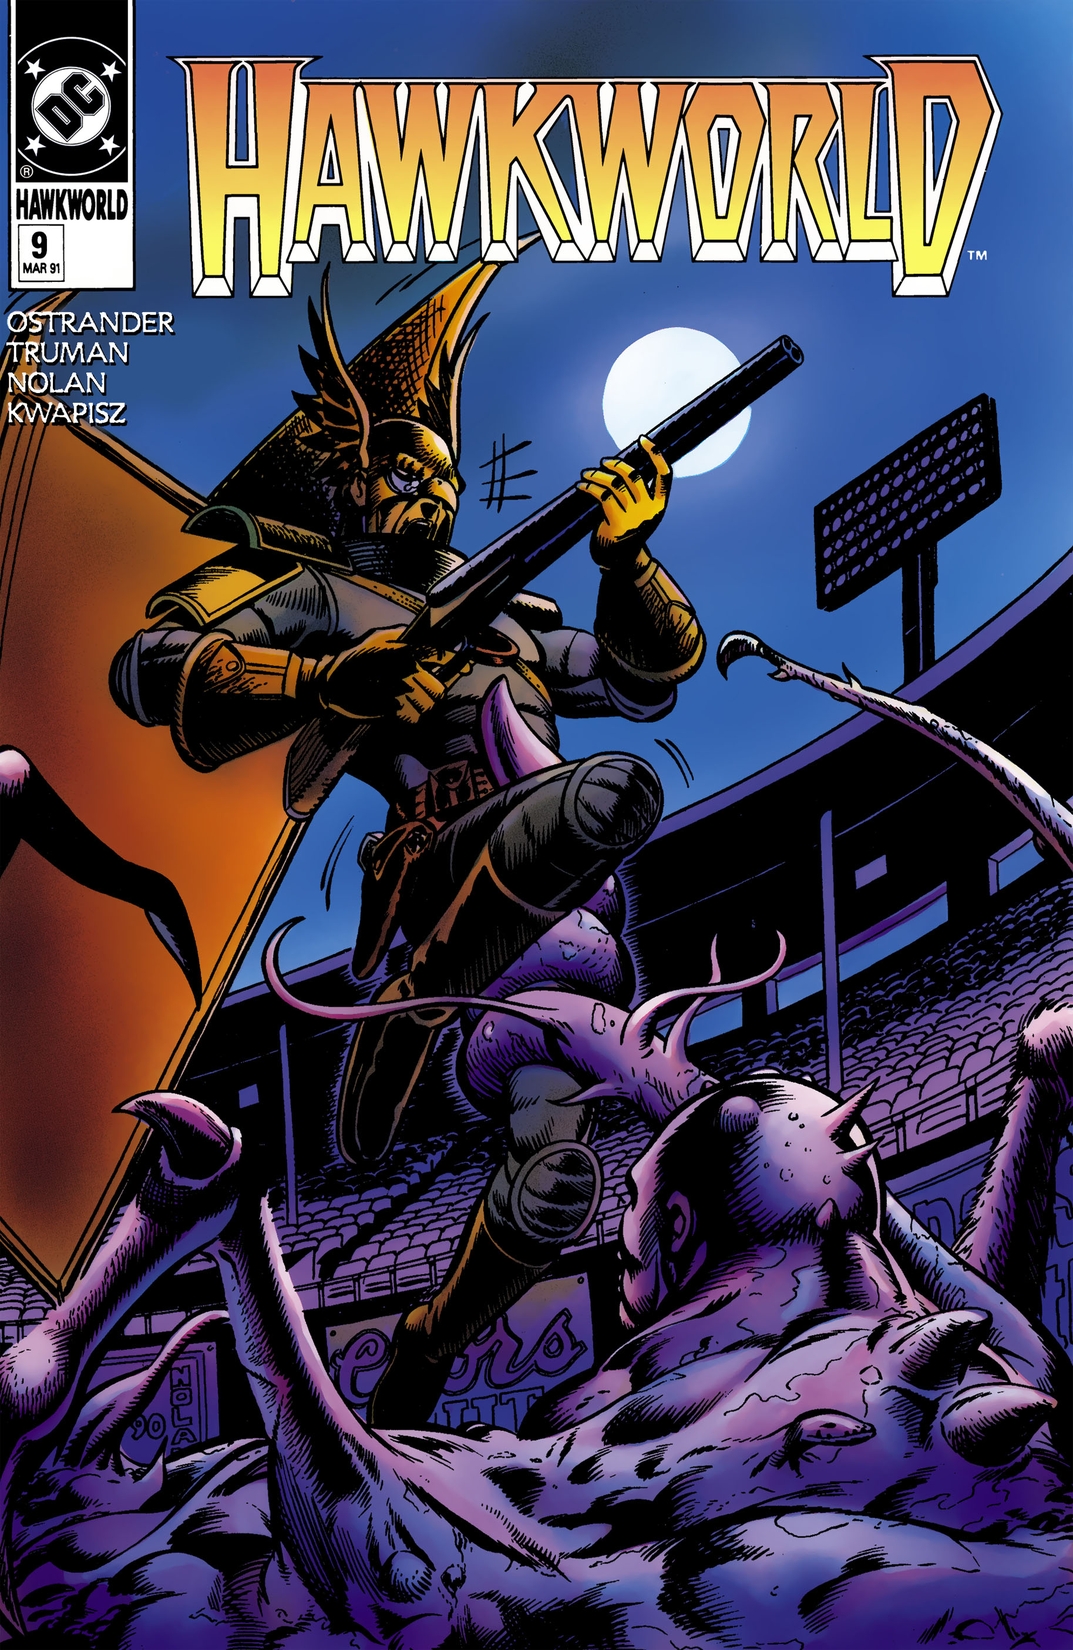 Hawkworld (1989-) #9 preview images